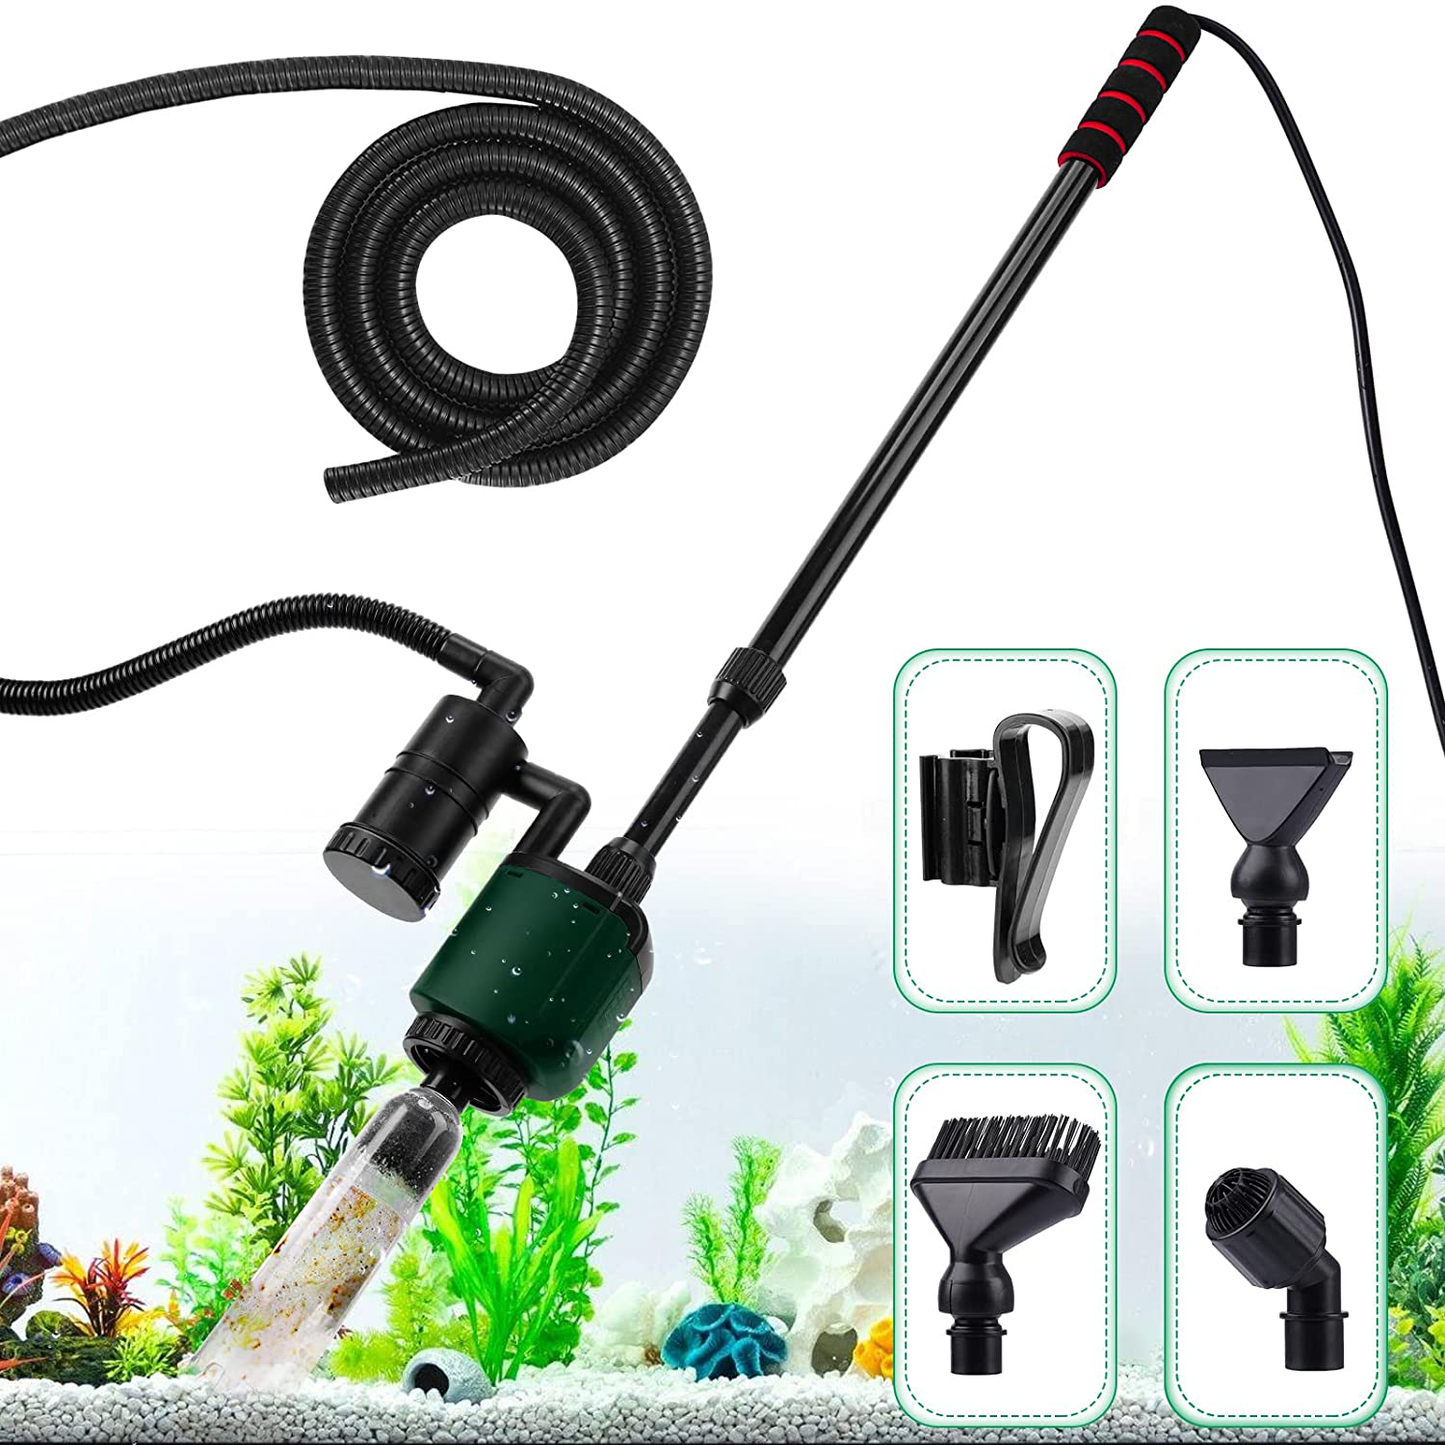 QODISA Aquarium Gravel Cleaner, New Upgrade Quick Vacuum Water Changer with Electric Automatic Removable Fish Tank Cleaning Tools Sand Cleaner Accessories Siphon Universal Pump Aquarium Water Changing